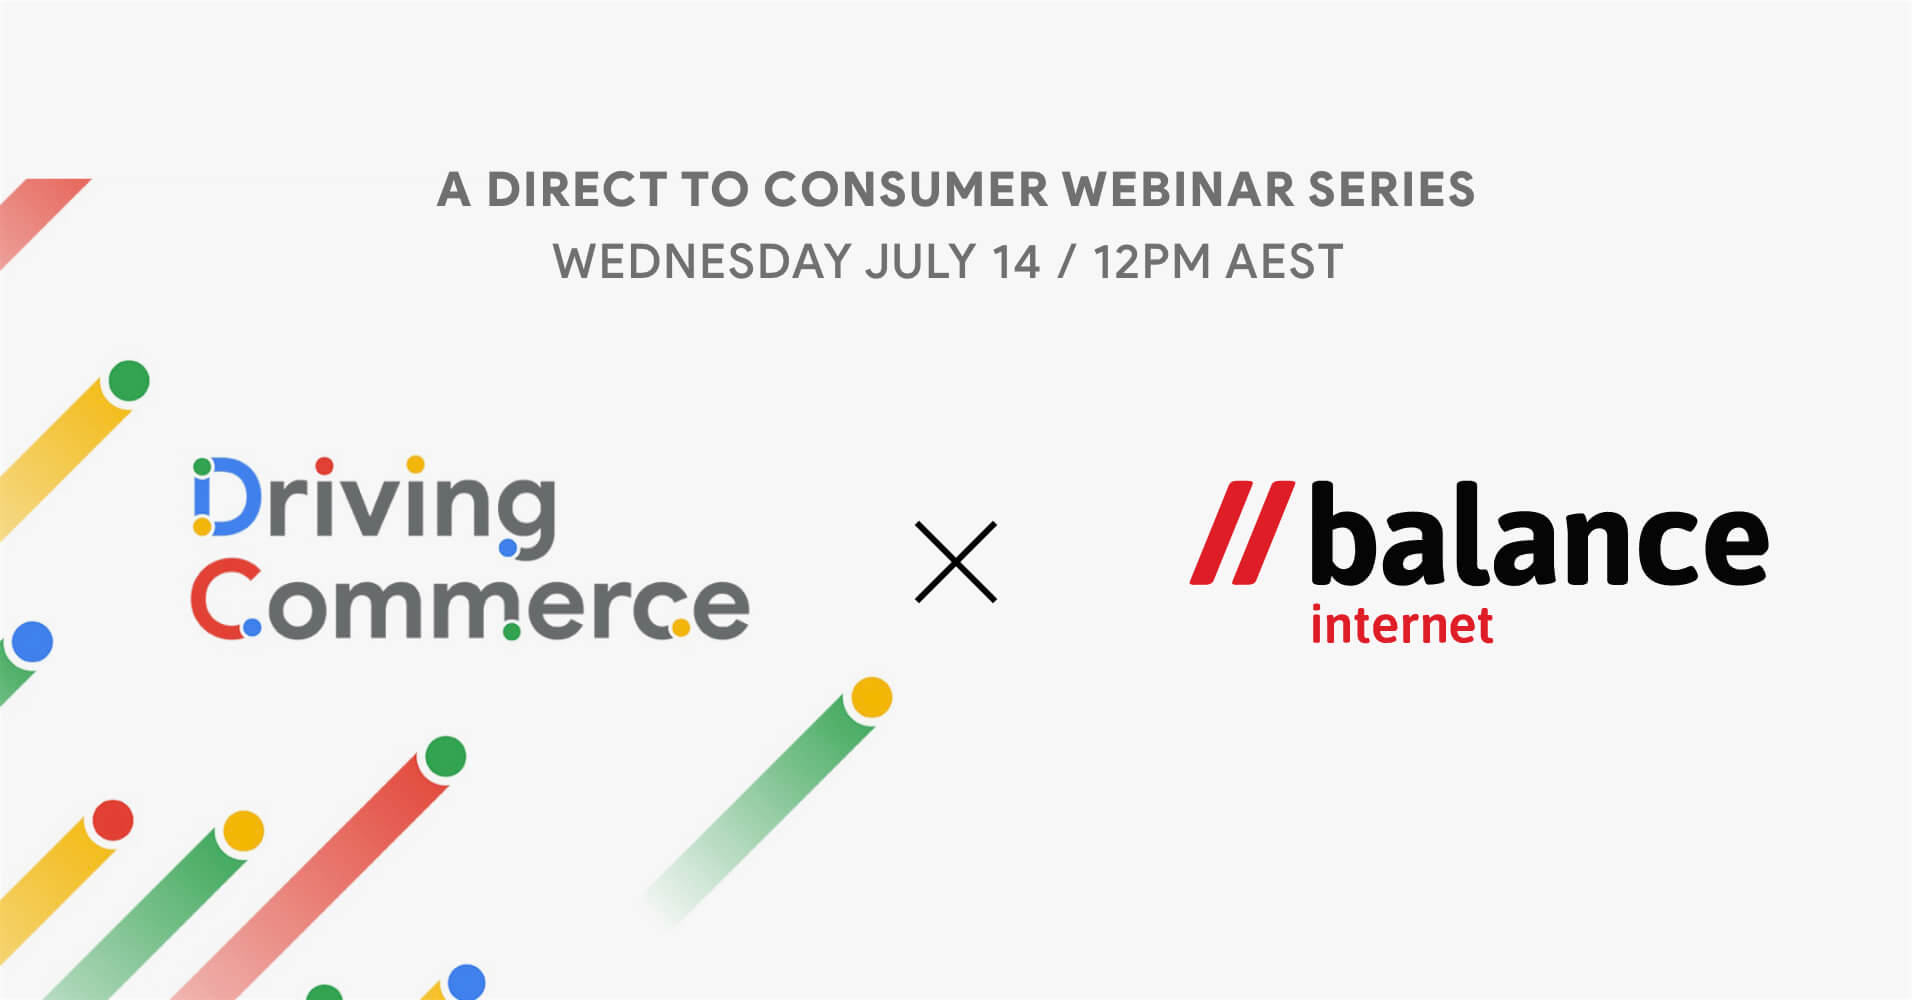 Direct to consumer webinar, hosted by google